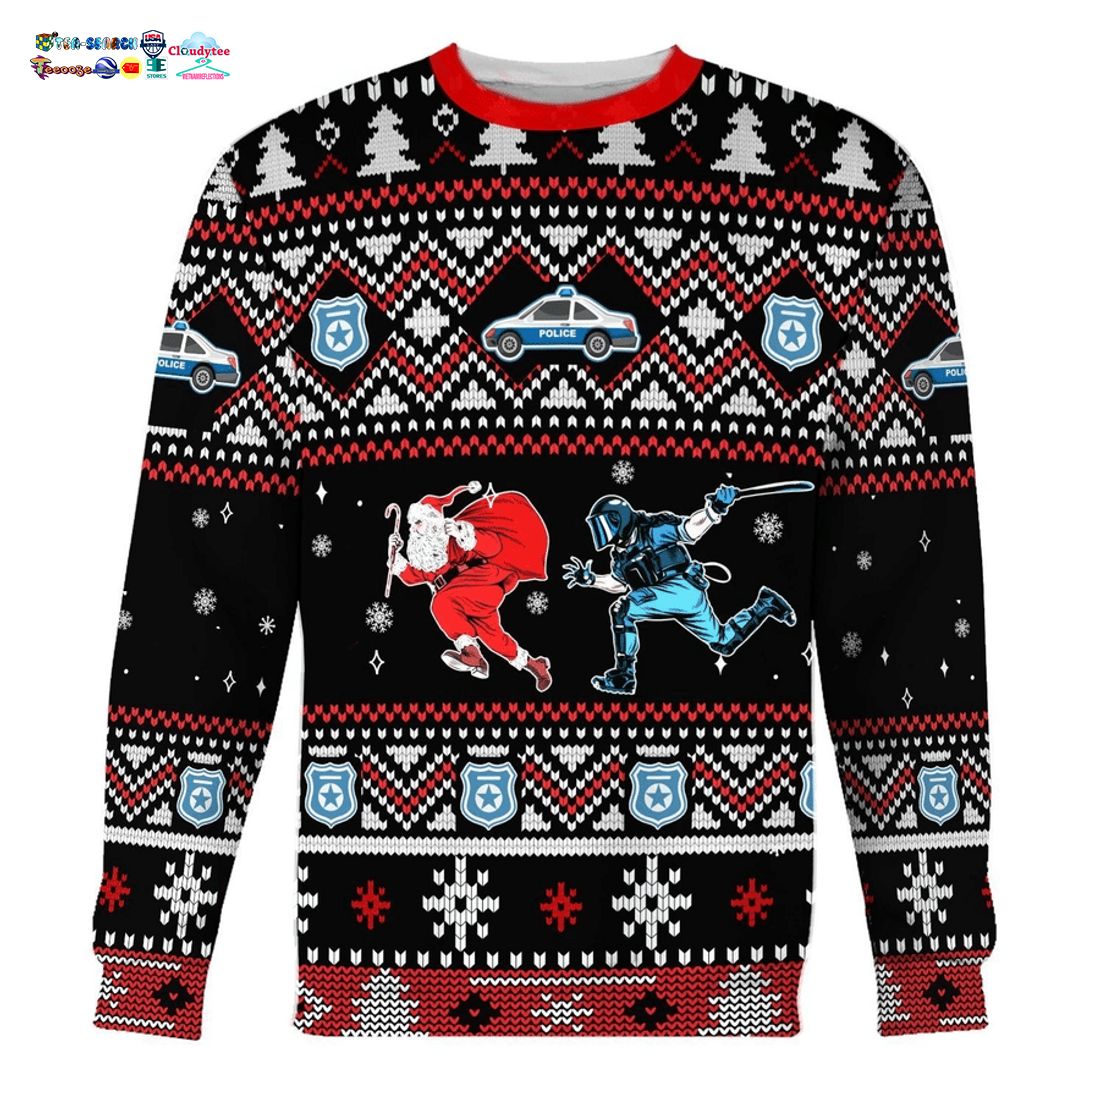 Santa Claus Riot Police Ugly Christmas Sweater - Good one dear